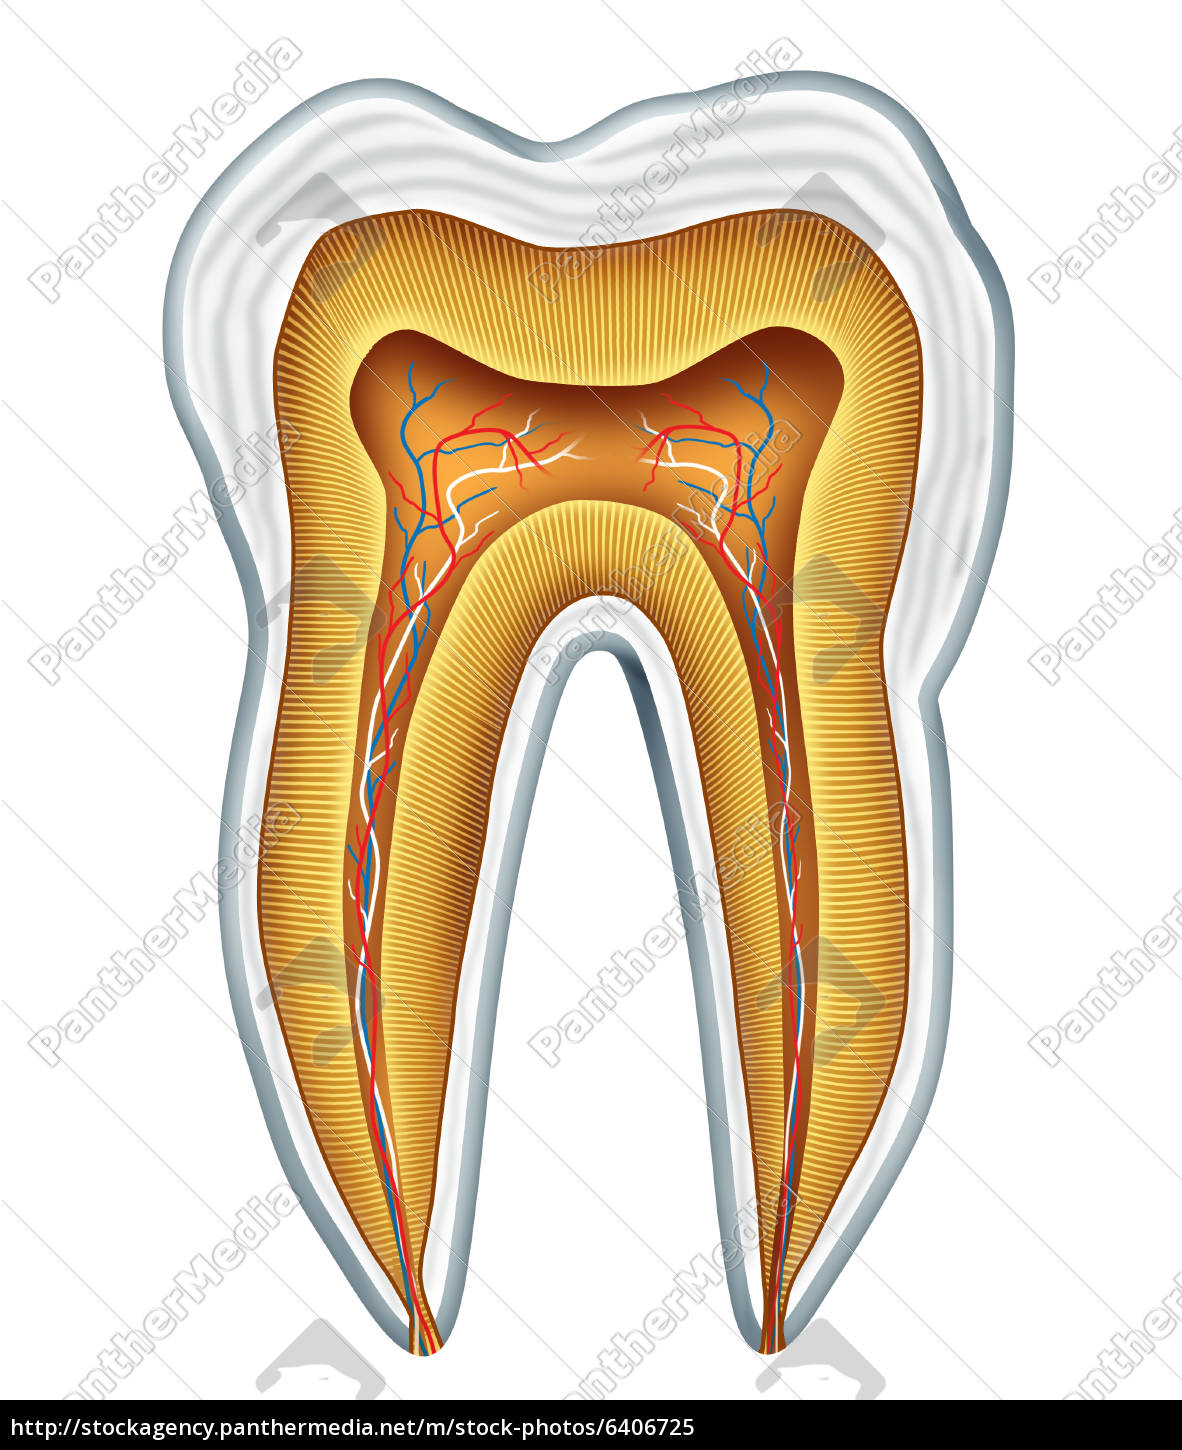 free　Stock　Tooth　medical　PantherMedia　Agency　anatomy　image　Royalty　#6406725